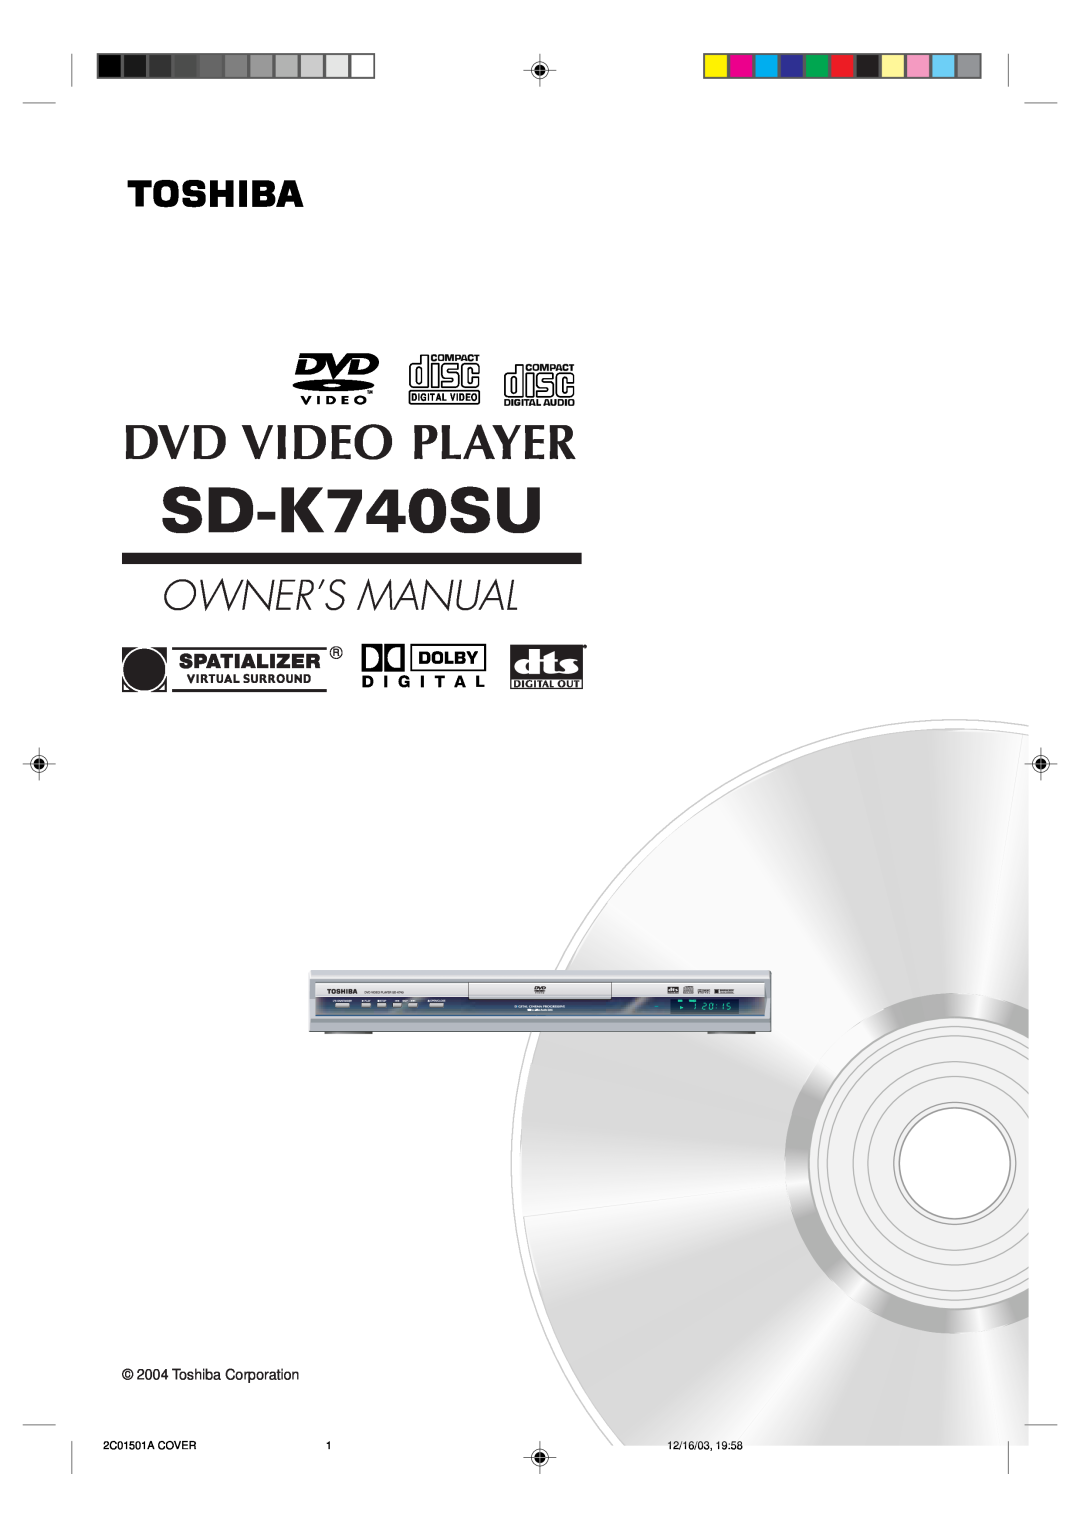 Toshiba SD-K740SU owner manual Dvd Video Player, Owner’S Manual, Digital Video 